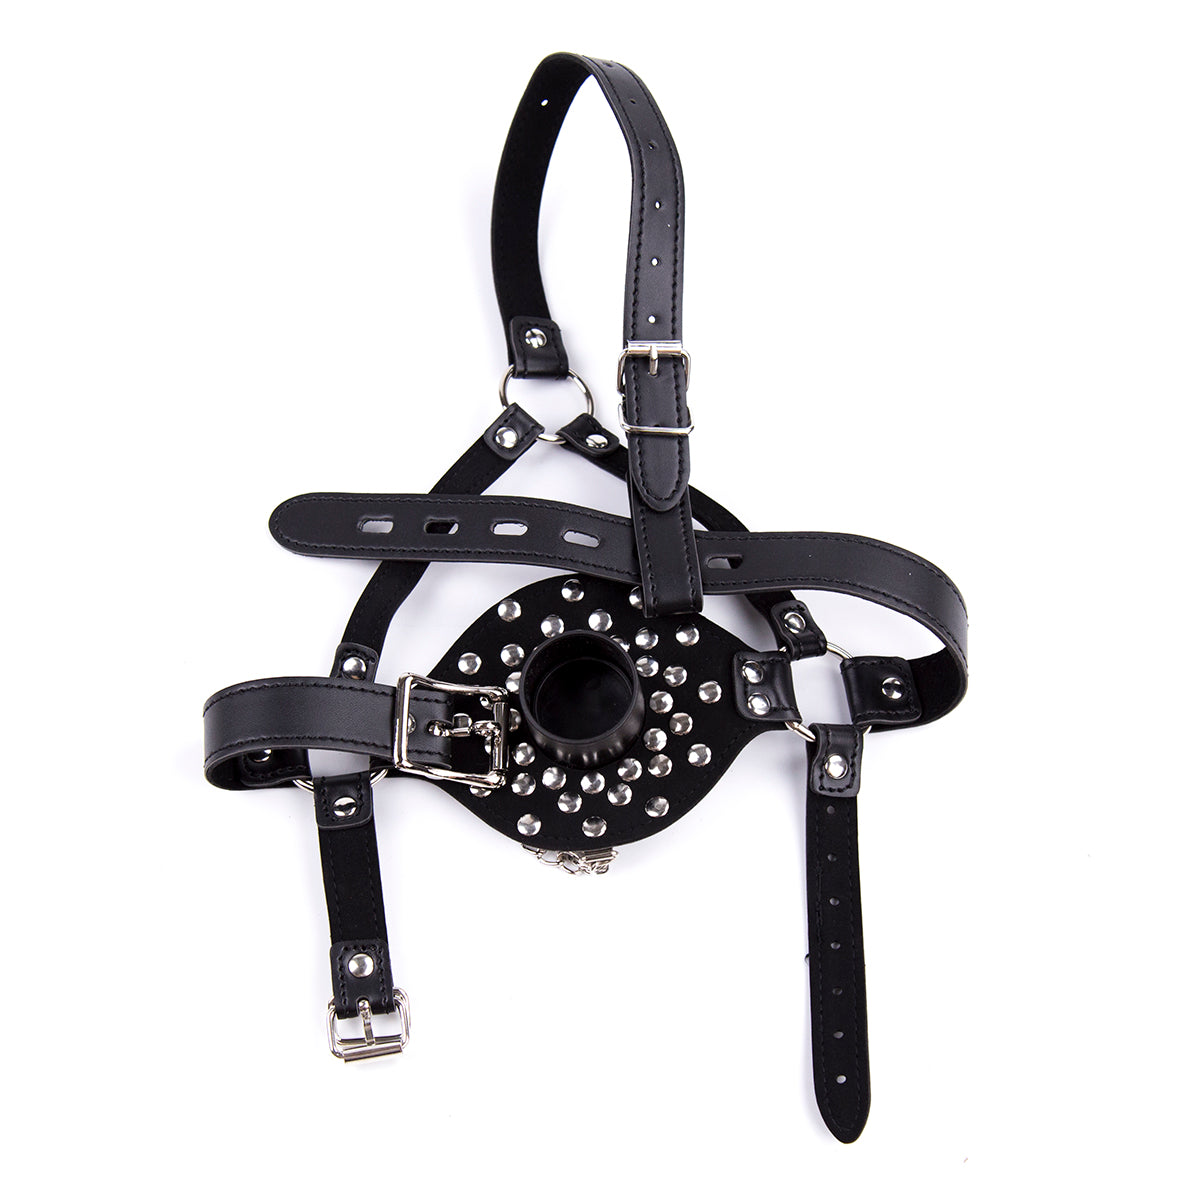 BDSM Bondage Mouth Opener Cover Cup Full Head Harness - Black